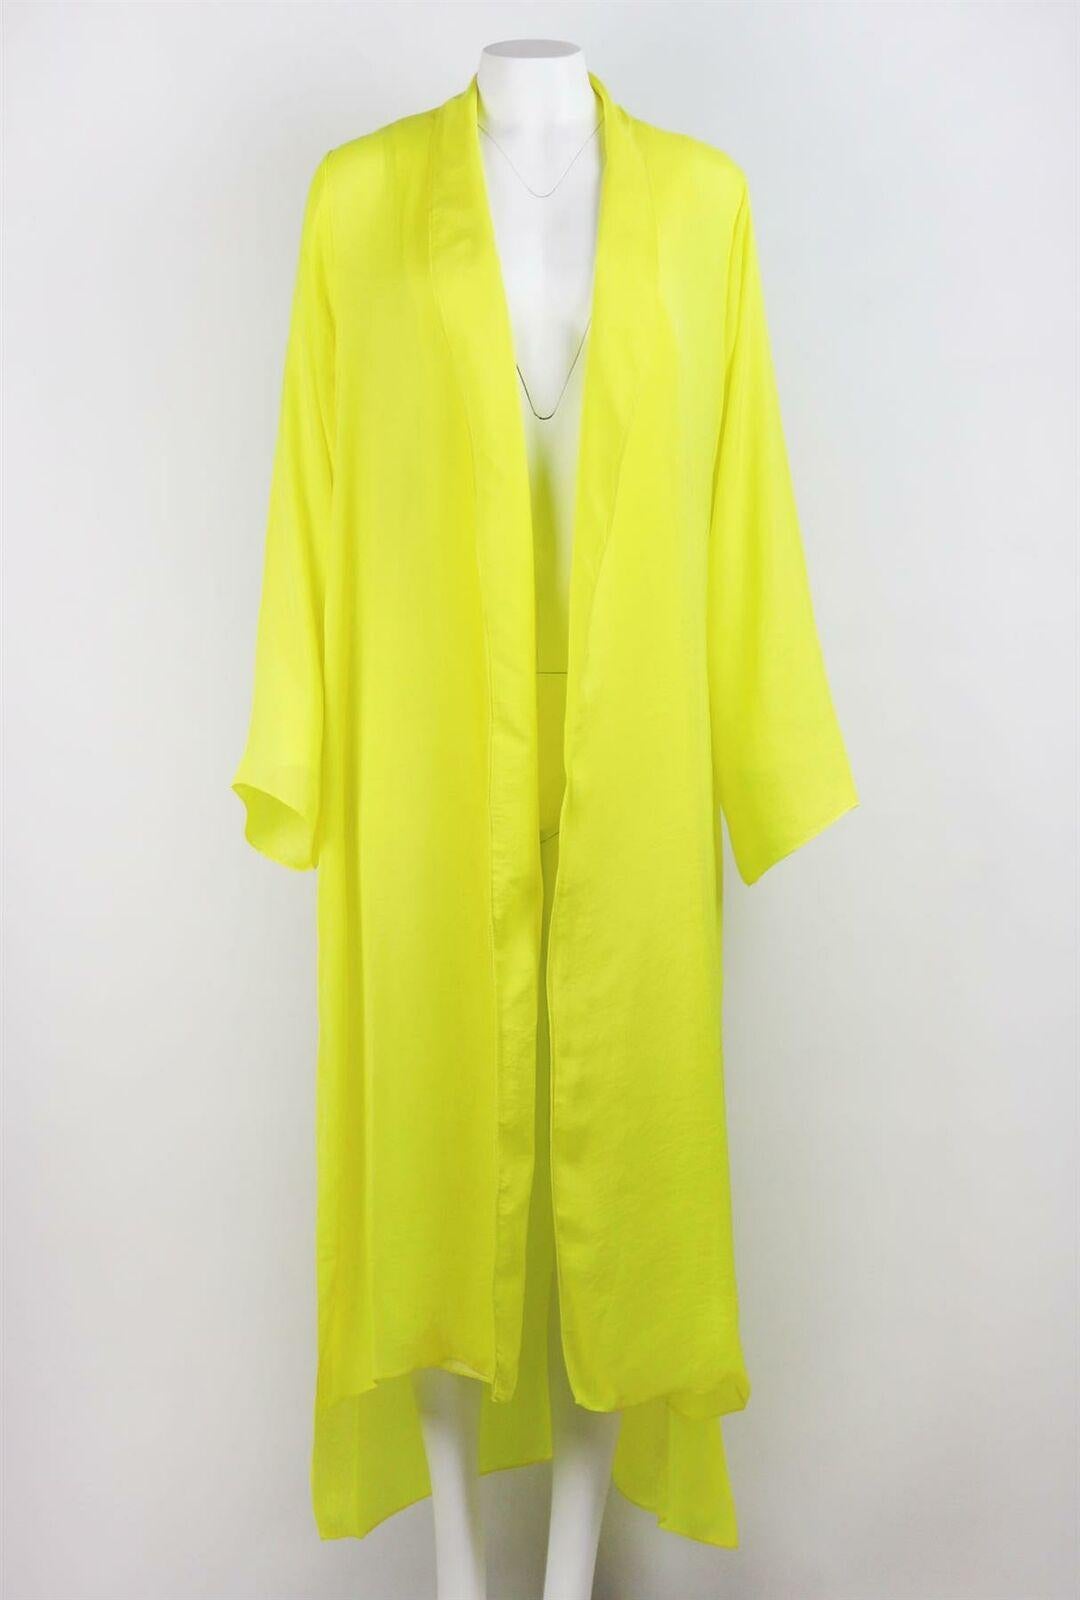 Juan Carlos Obando's fluid designs drape over the body in the most flattering way, cut from vibrant yellow and made from smooth satin, this long-line jacket has slits at the sides. Yellow satin. Slips on. 100% Viscose. 

Size: US 2 (UK 6, FR 34, IT